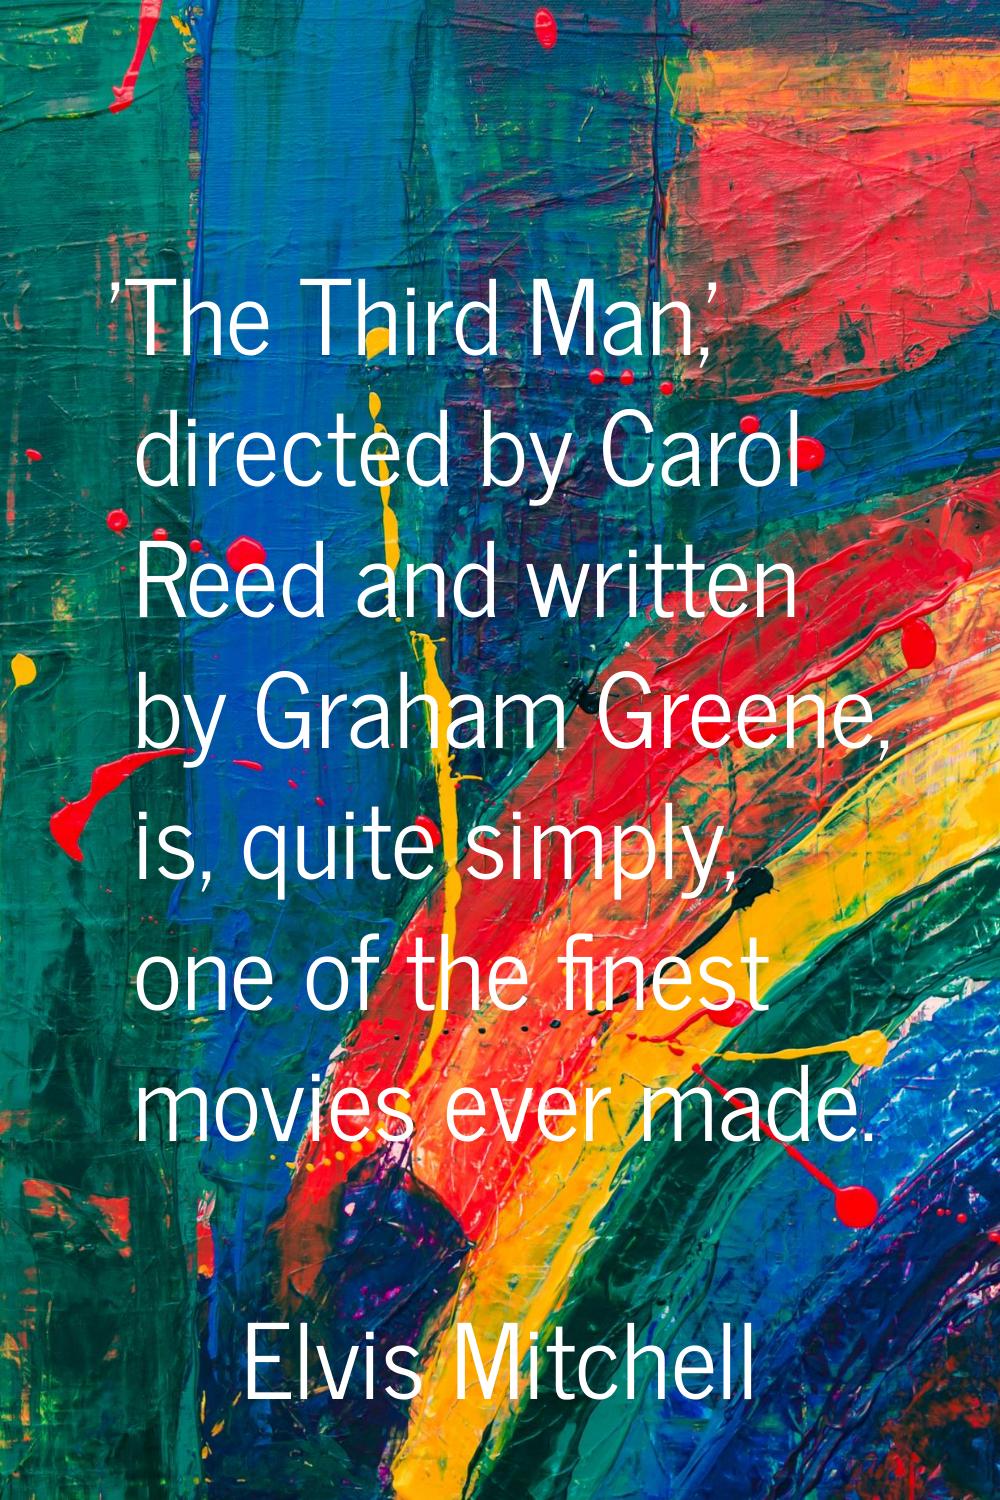 'The Third Man,' directed by Carol Reed and written by Graham Greene, is, quite simply, one of the 